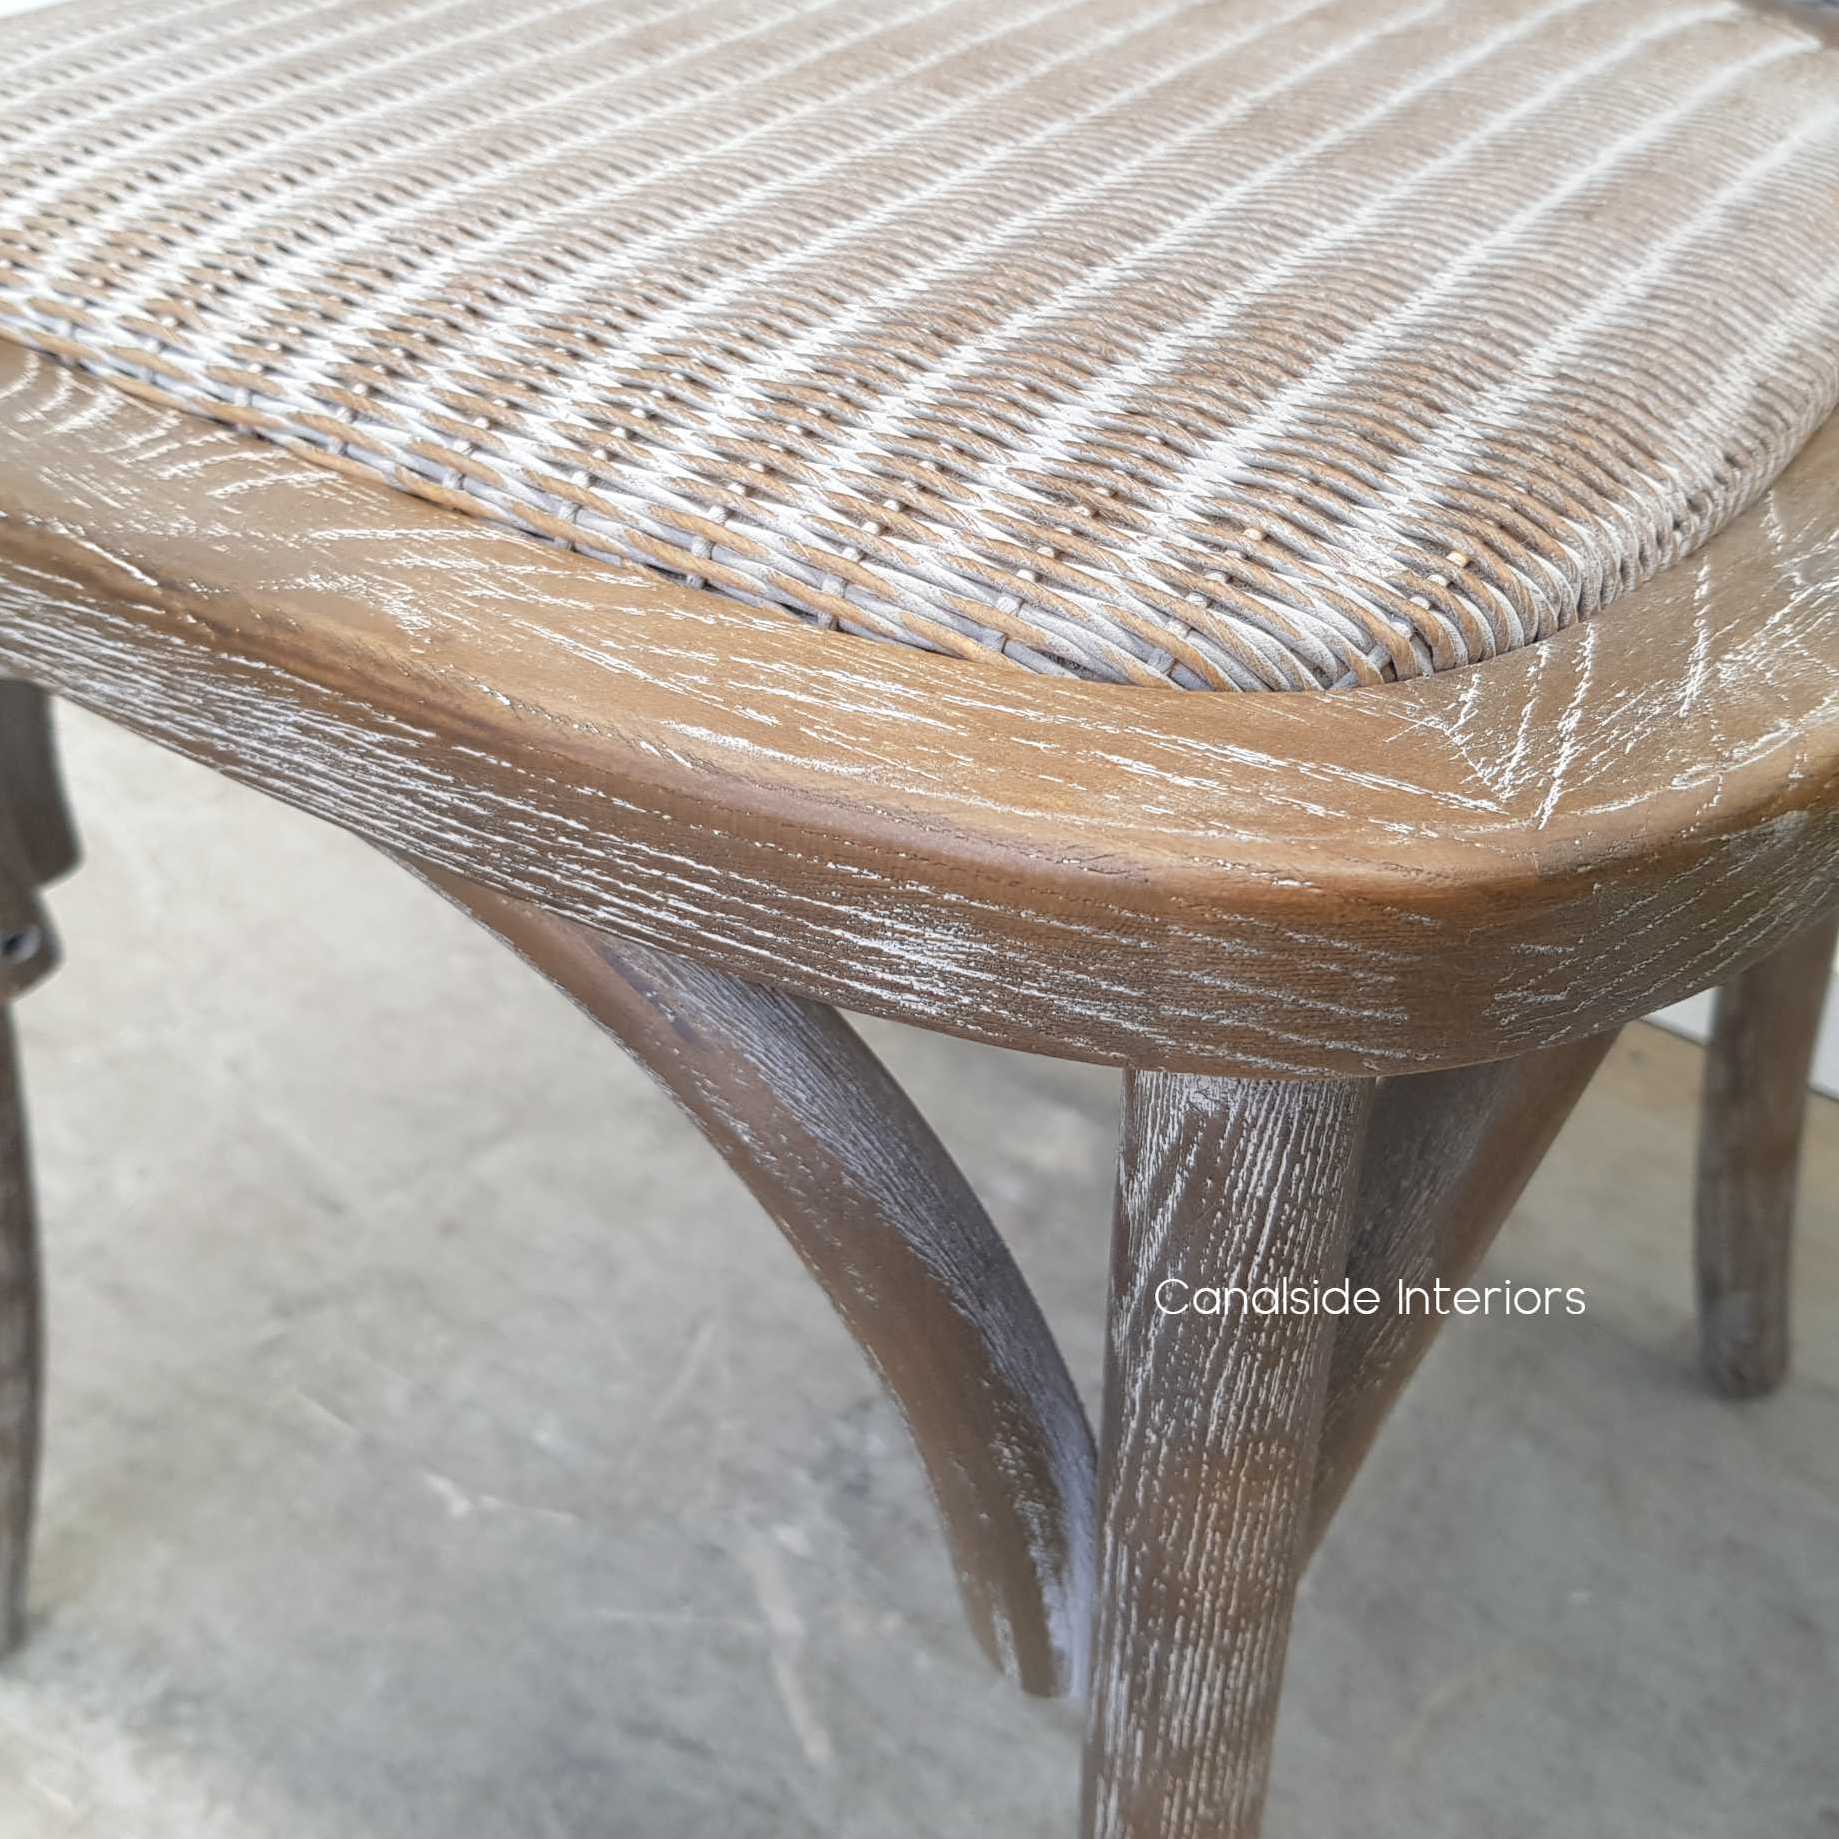 Botanica Chair Weathered Oak  Dining, CHAIRS, CAFE FURNITURE, HAMPTONS Style, PLANTATION Style, CHAIRS Dining, CAFE FURNITURE Stools & Chairs, PLANTATION STYLE